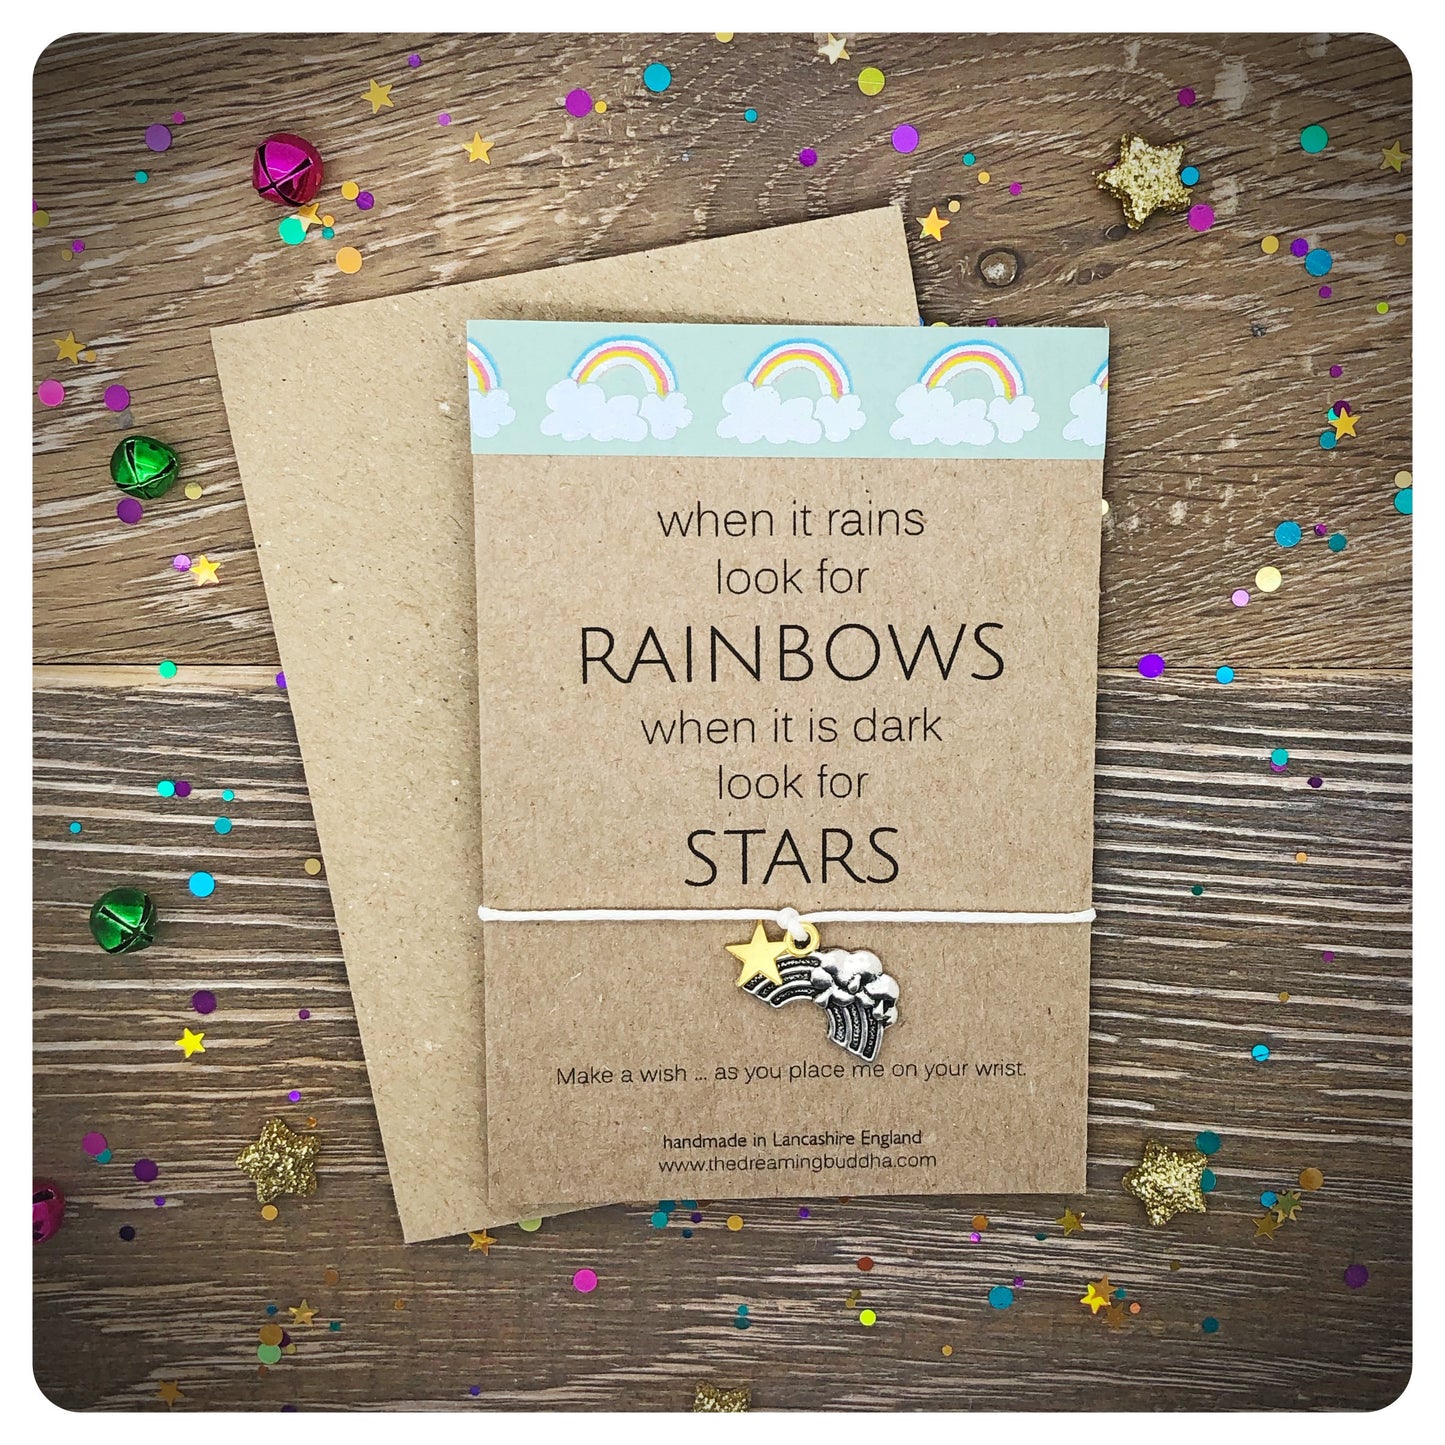 When It Rains Look For Rainbows Quote Card, Inspirational Wish Bracelet, Cheer Up Card And Gift For Friend